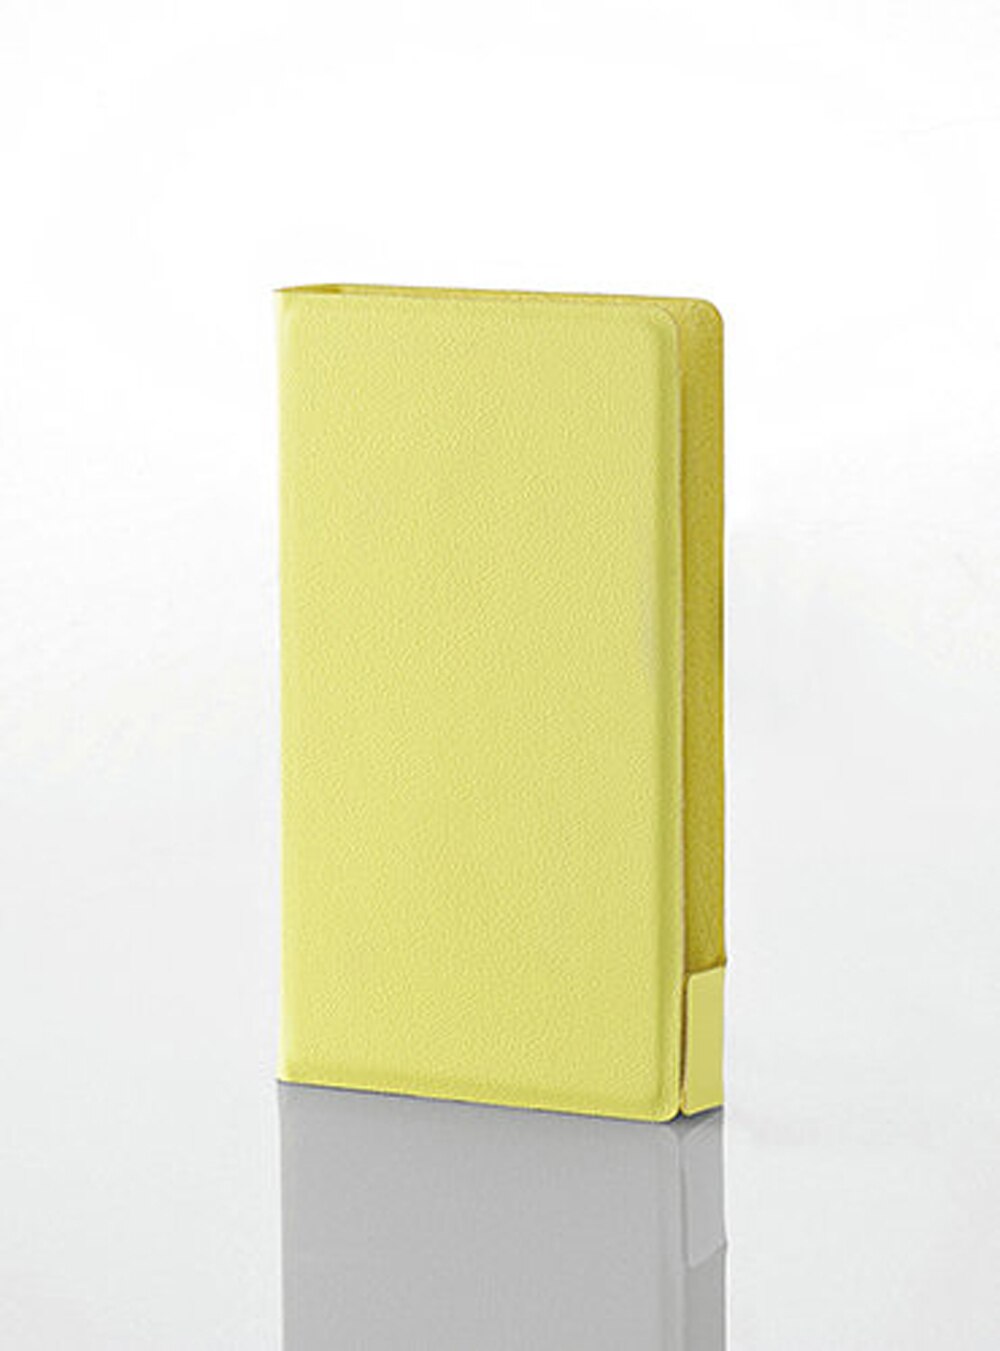 Flip Full Protective Leather Case for Sony Walkman NW-A100 A105 A105HN A106 A106HN A107 A100TPS Cover: Yelow